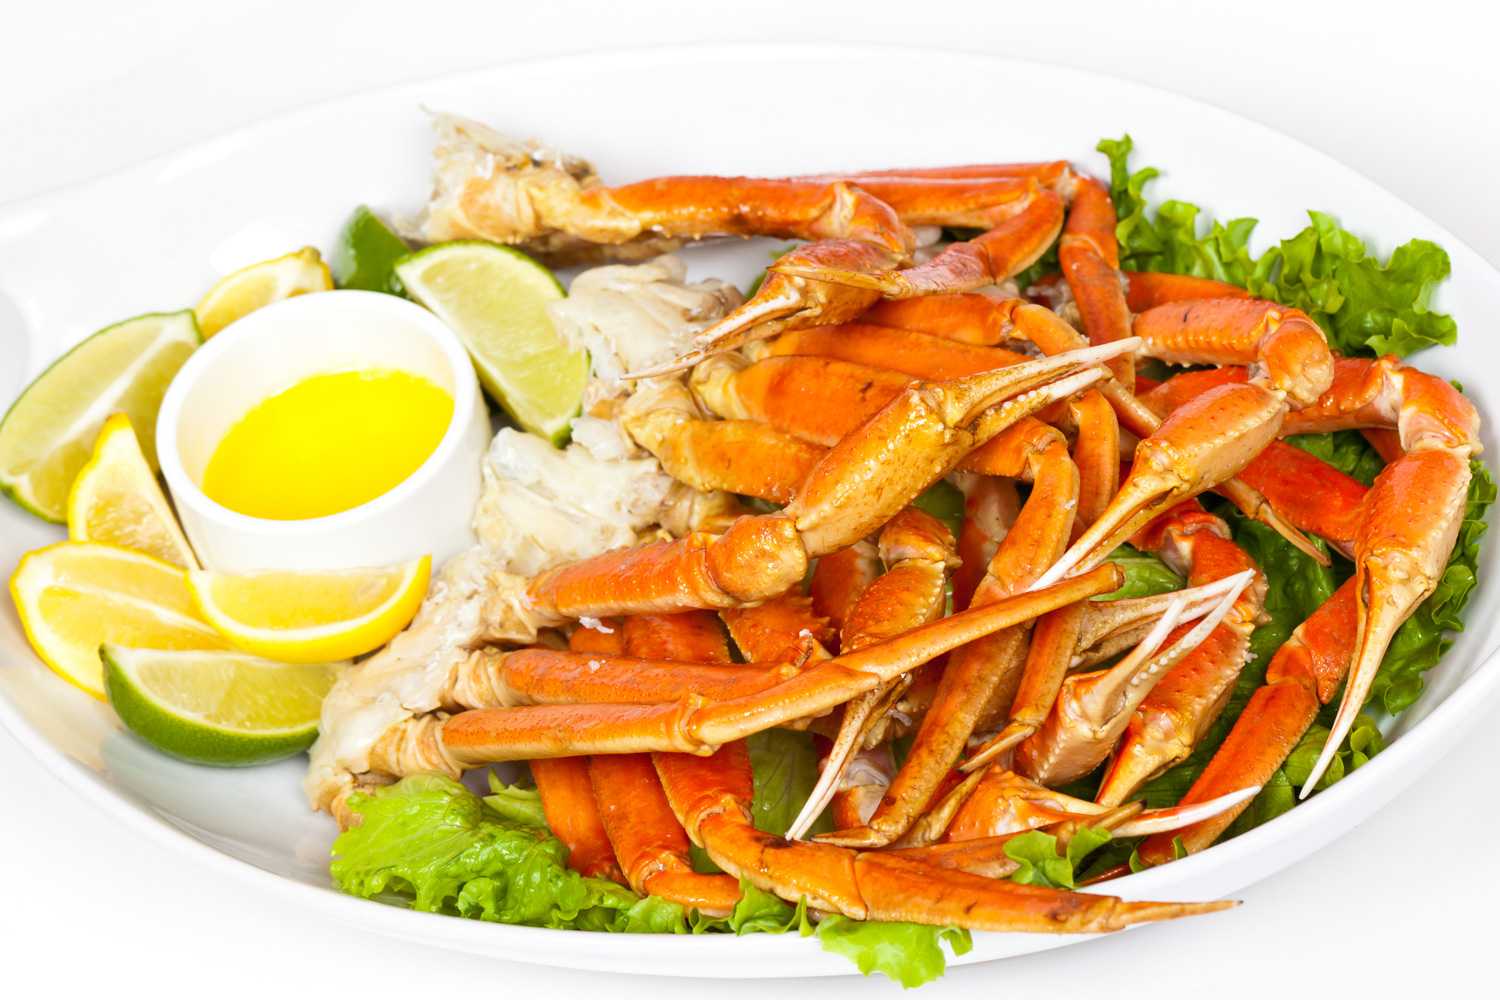 cooked crab legs on a plate with fresh lettuce, lemon juice and lime slice